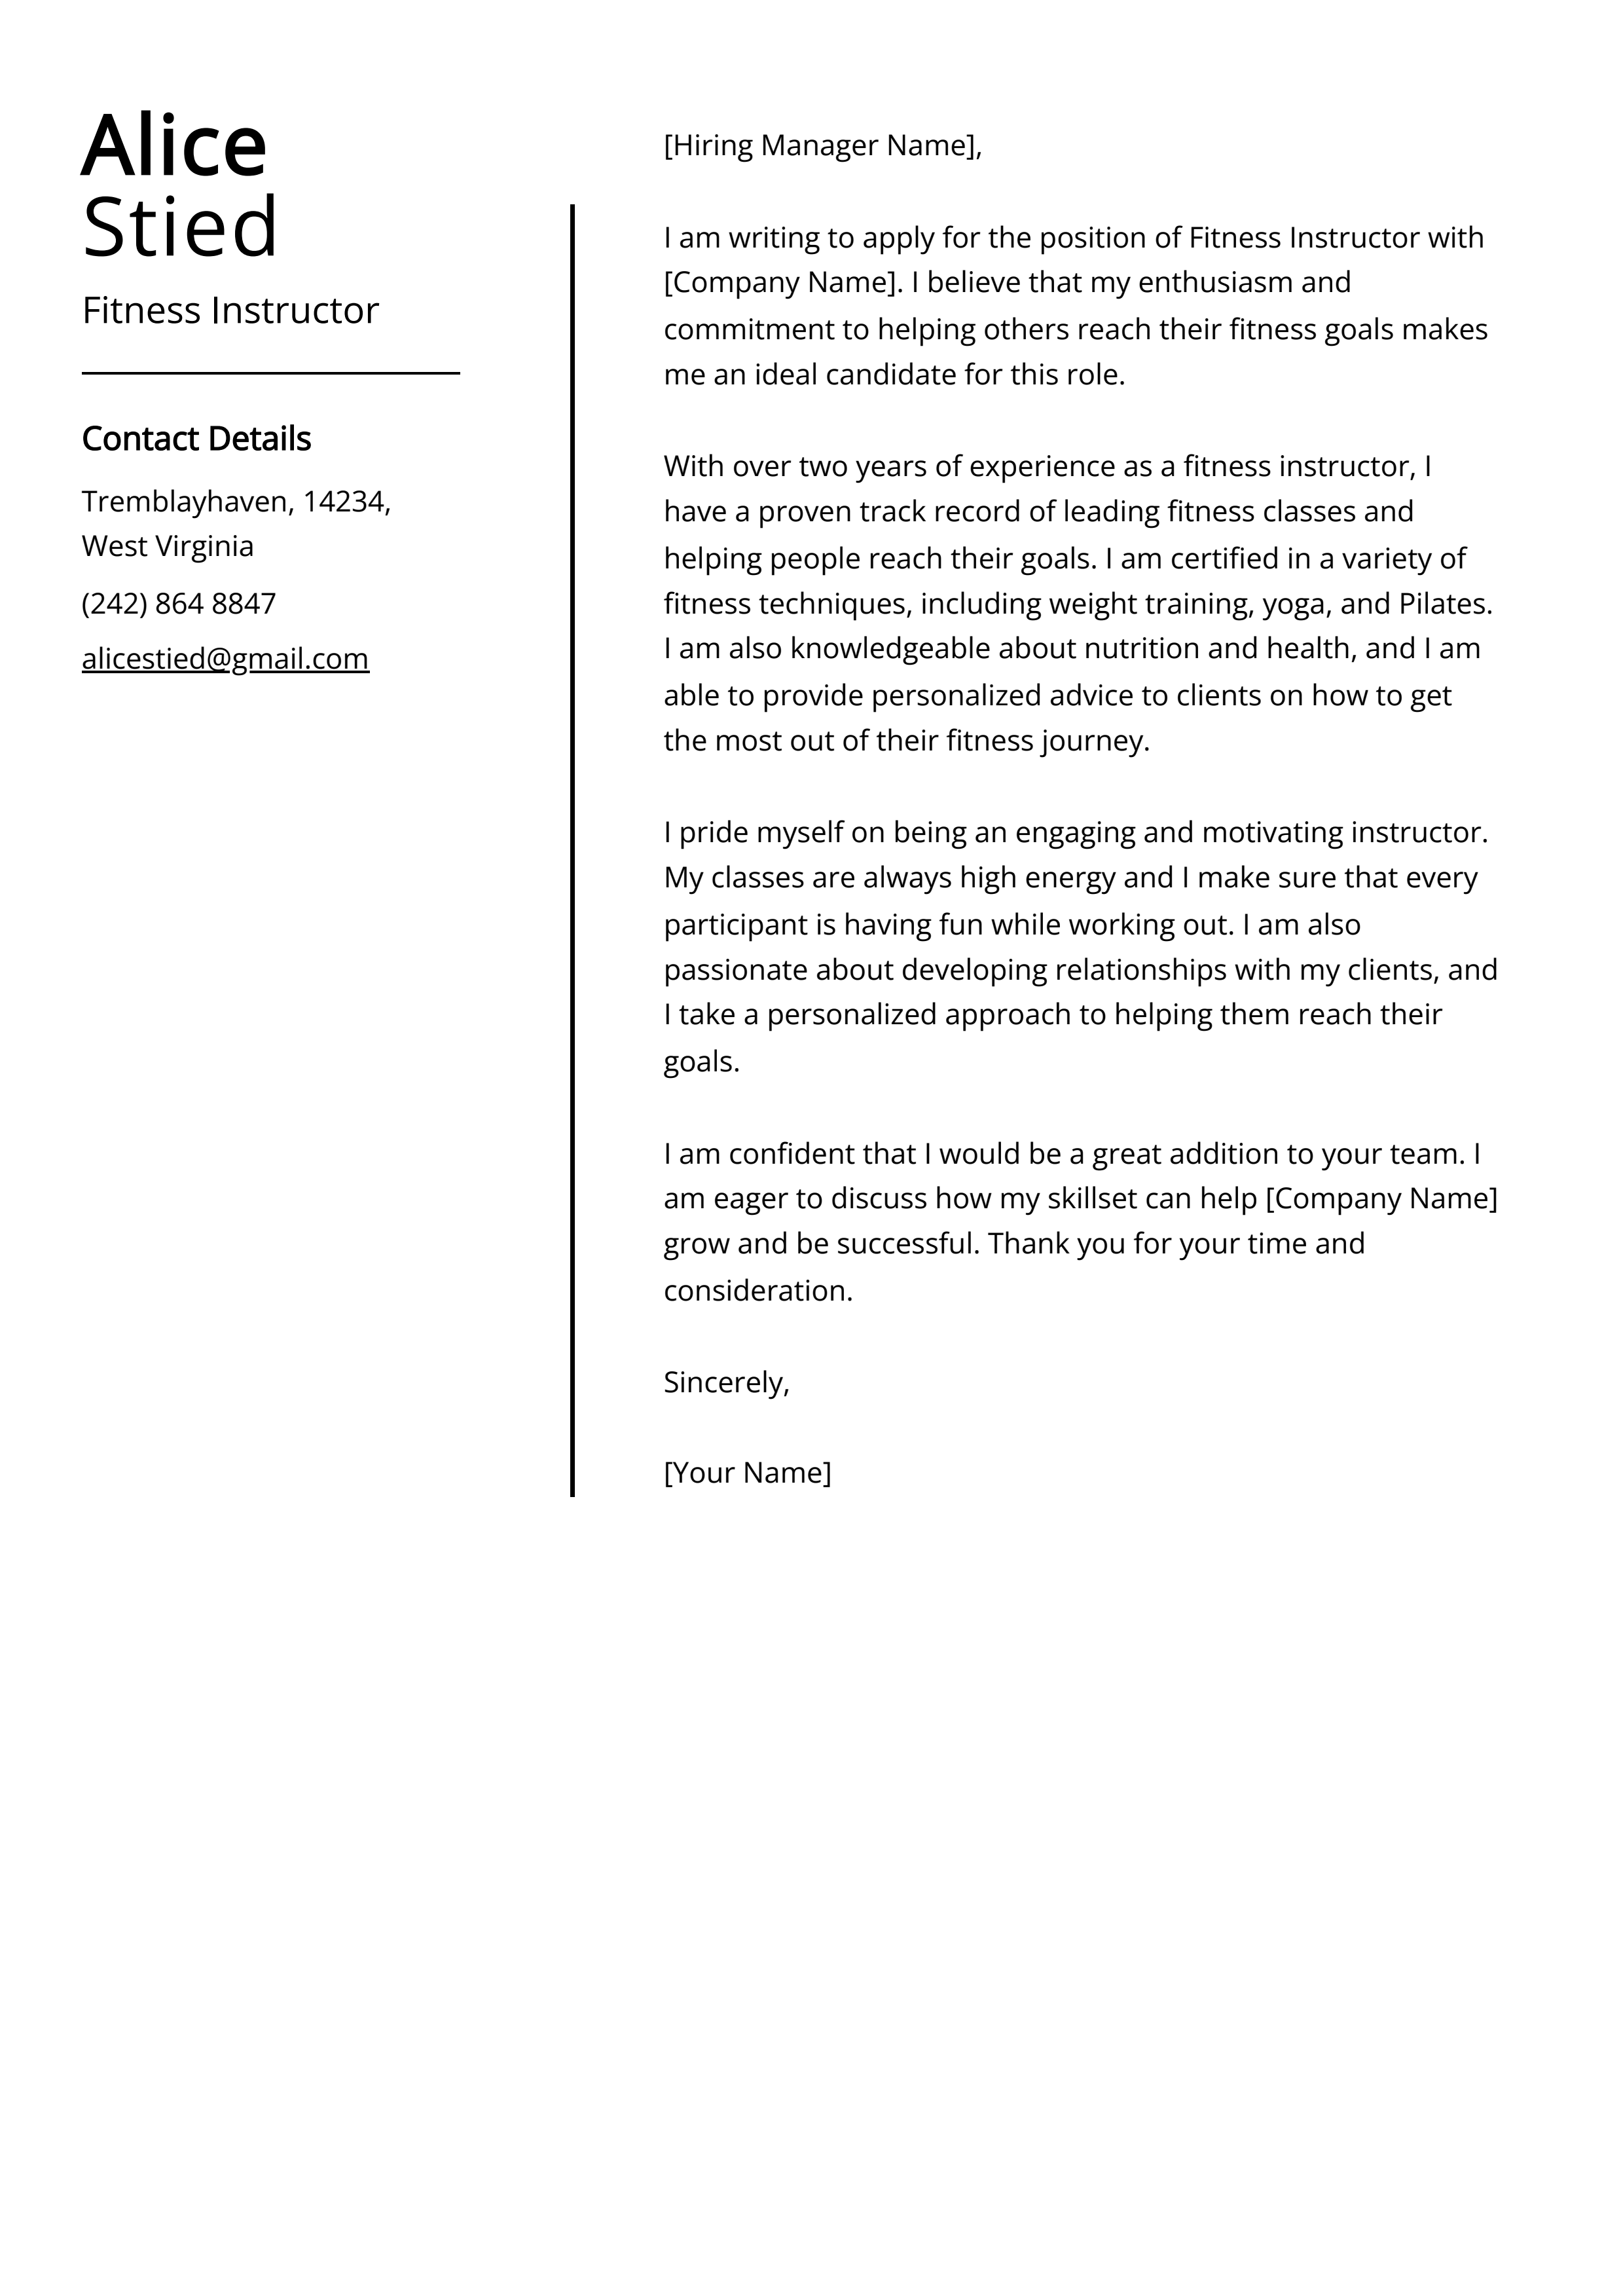 Experienced Fitness Instructor Cover Letter Example